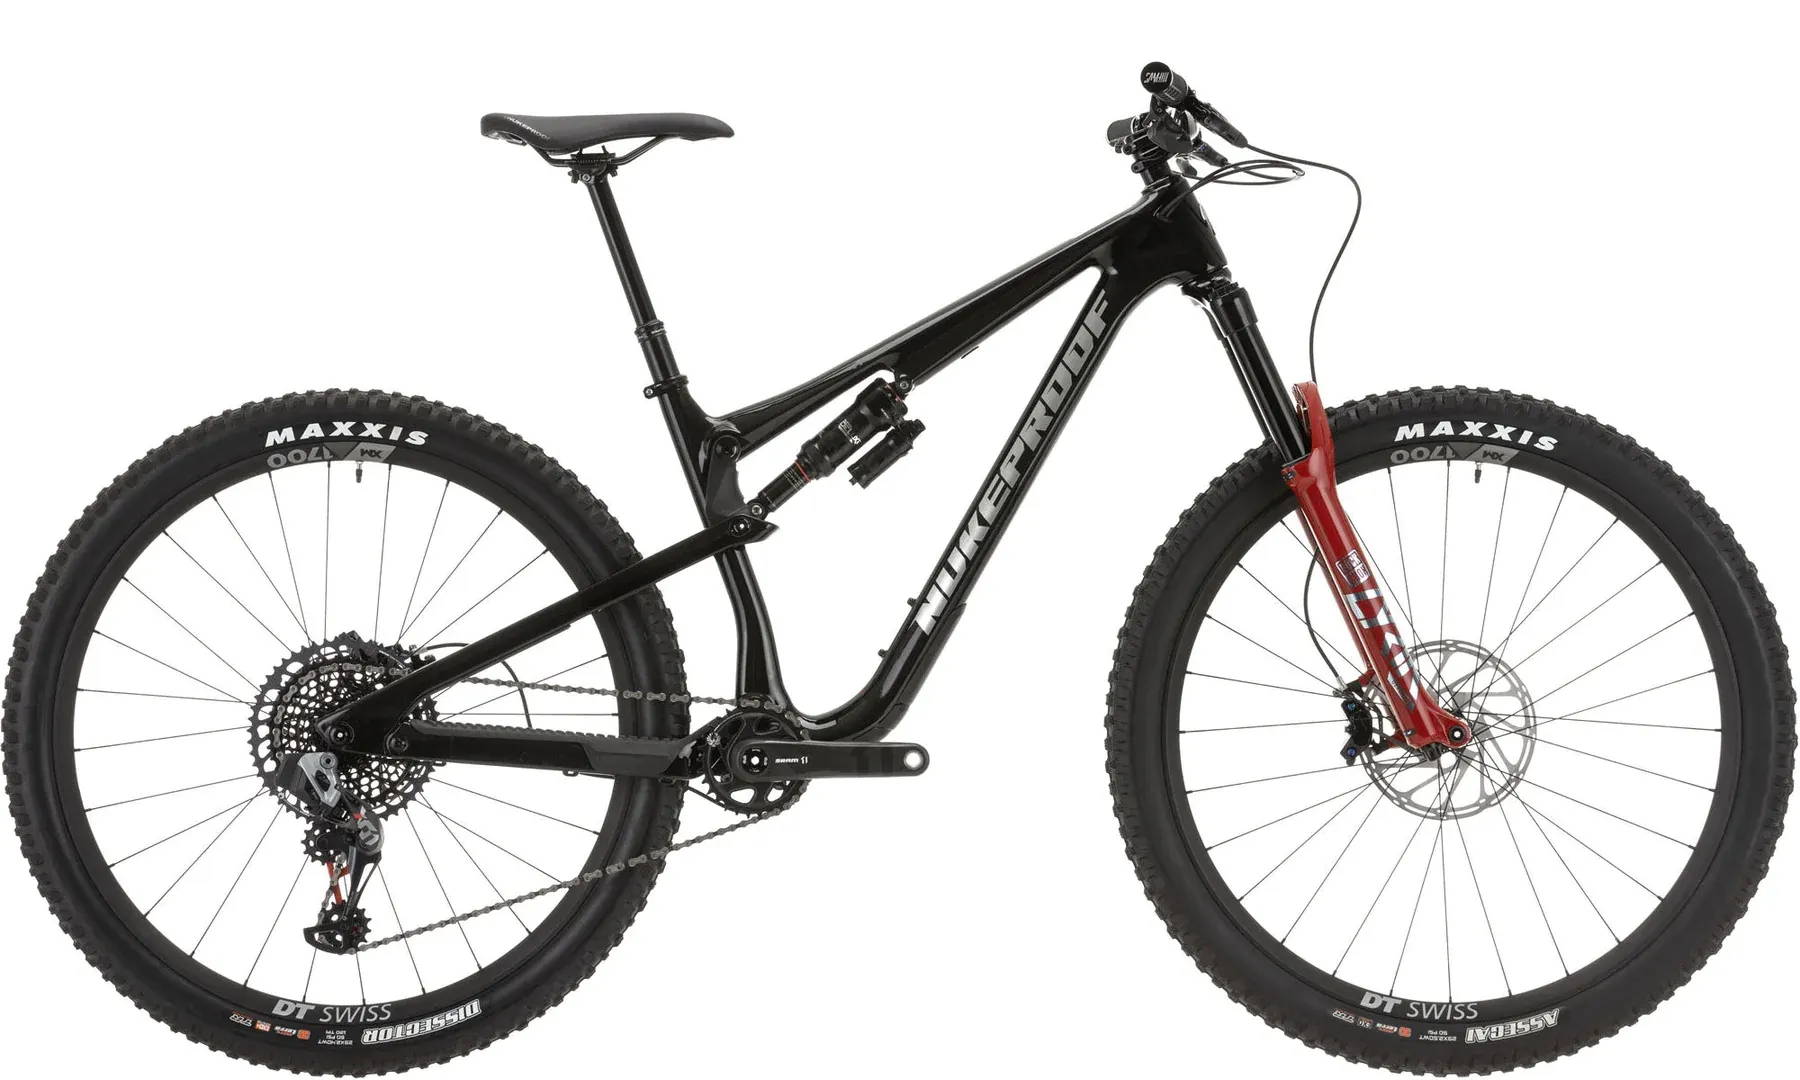 Side view of the Nukeproof Reactor mountain bike.